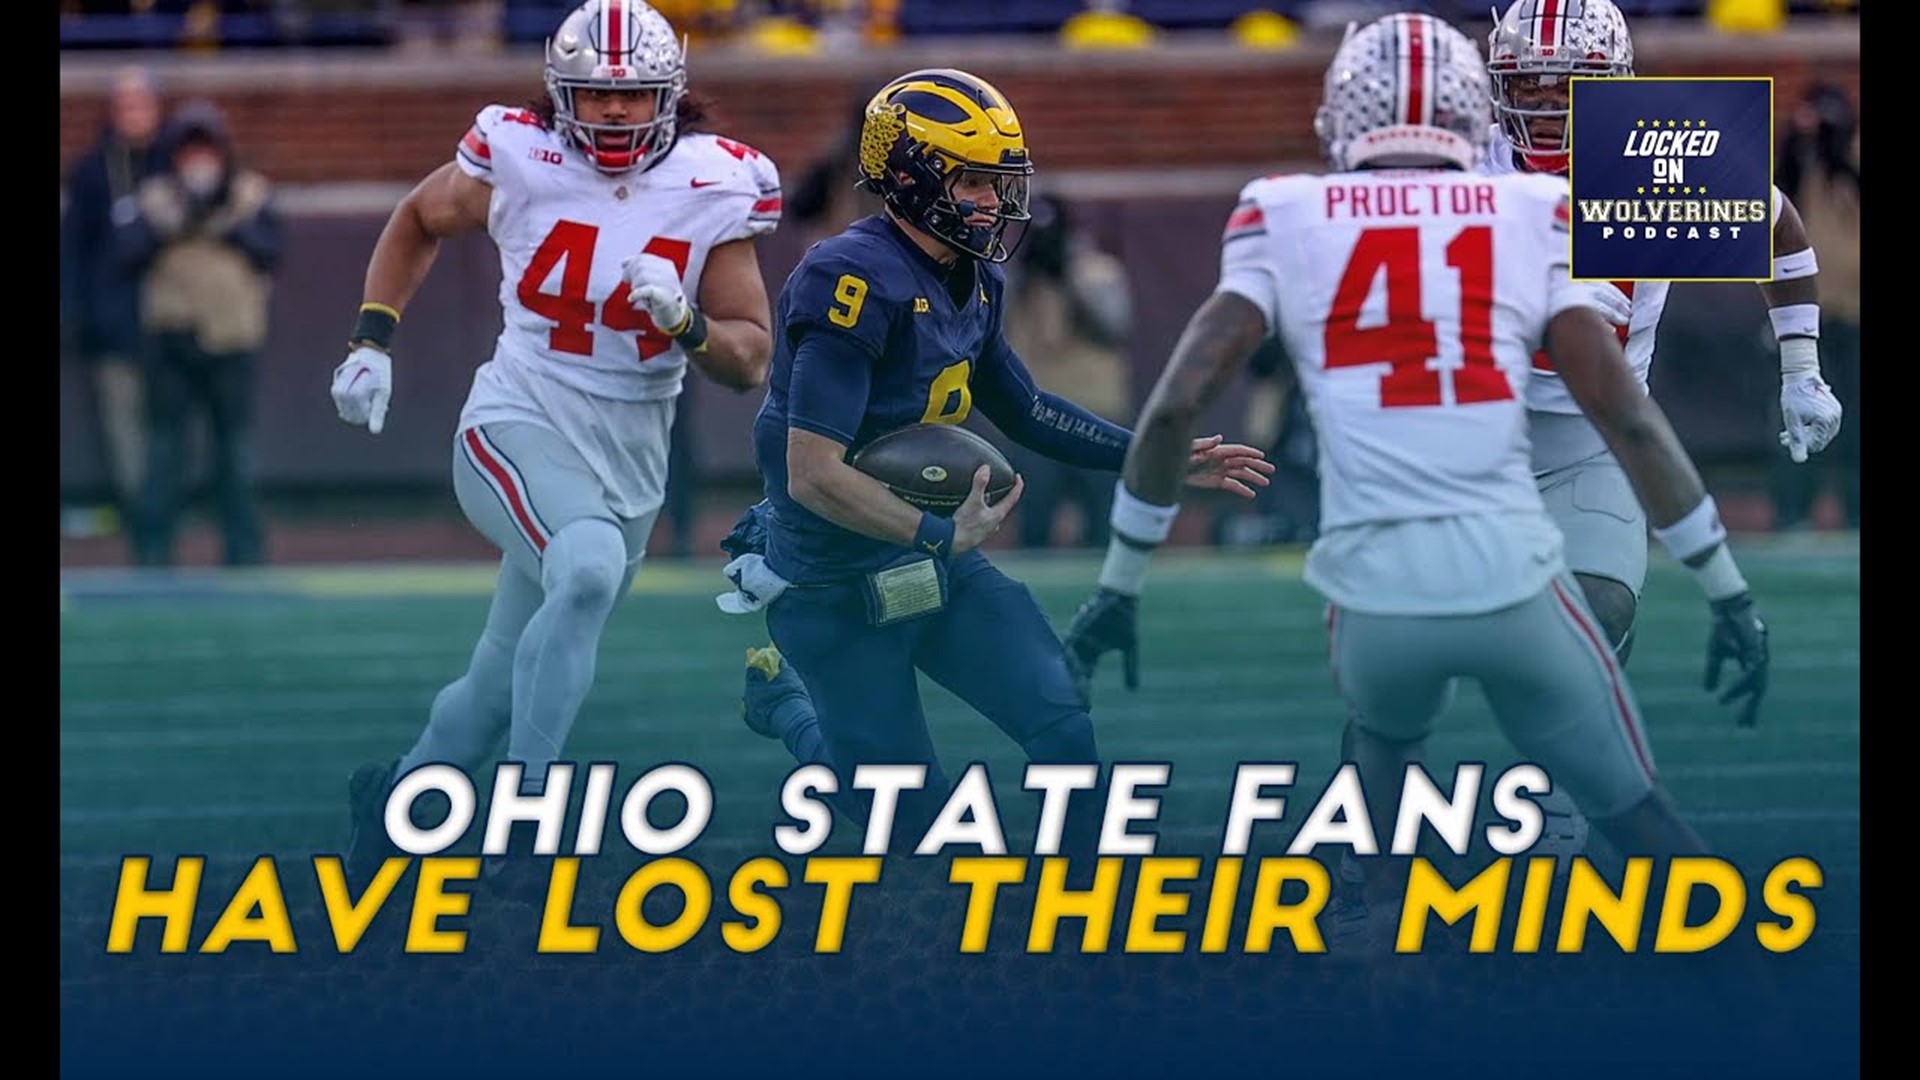 Ohio State fans have lost their minds